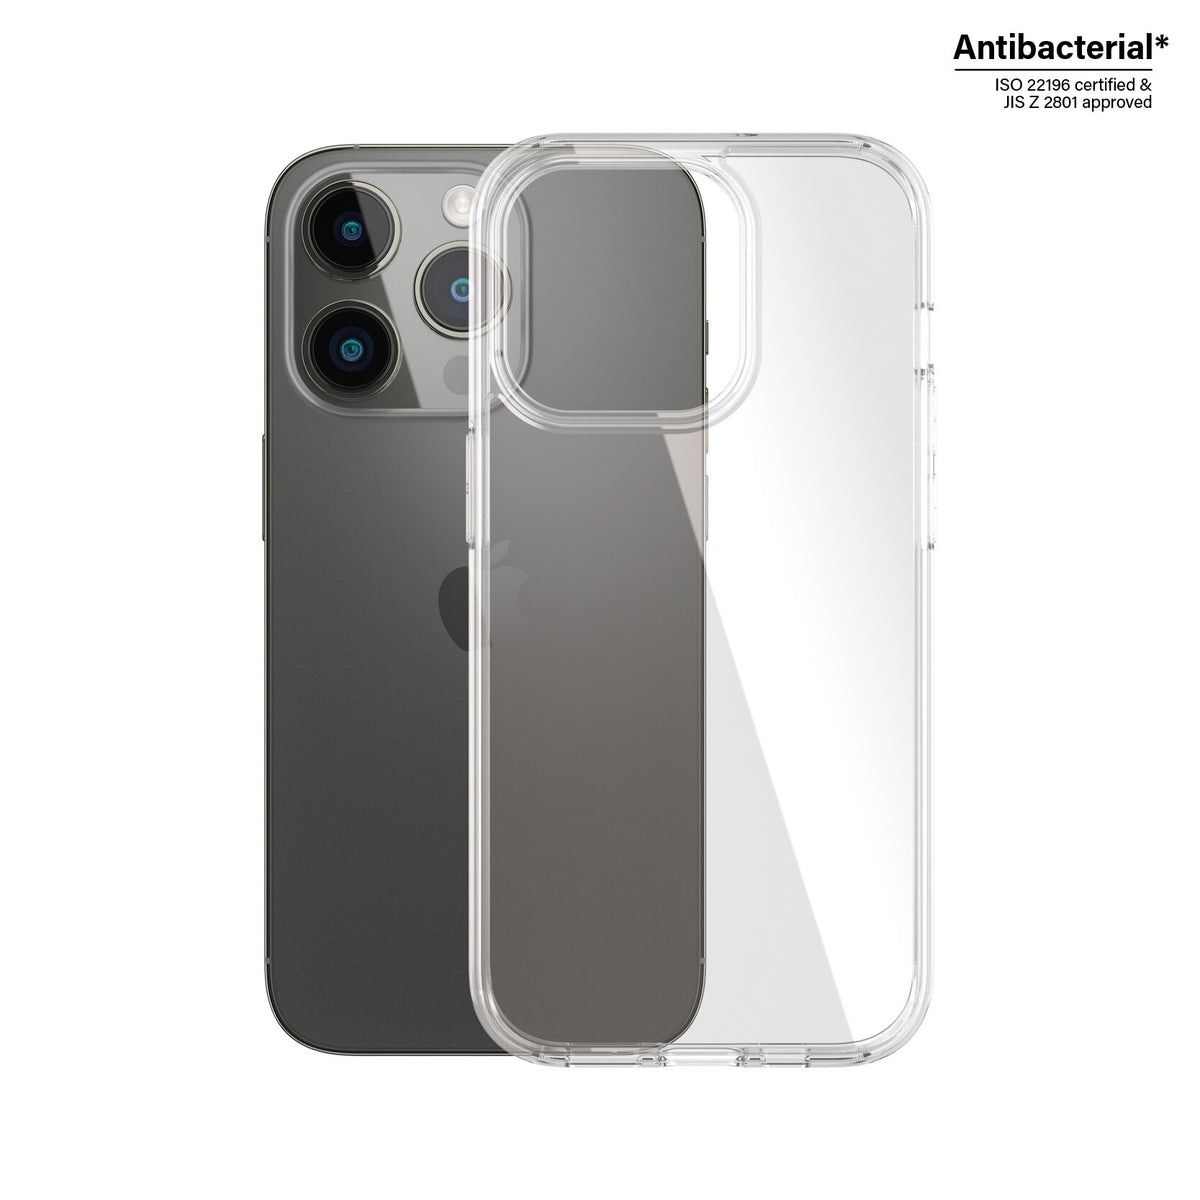 PanzerGlass ® HardCase for iPhone 14 Pro in Clear